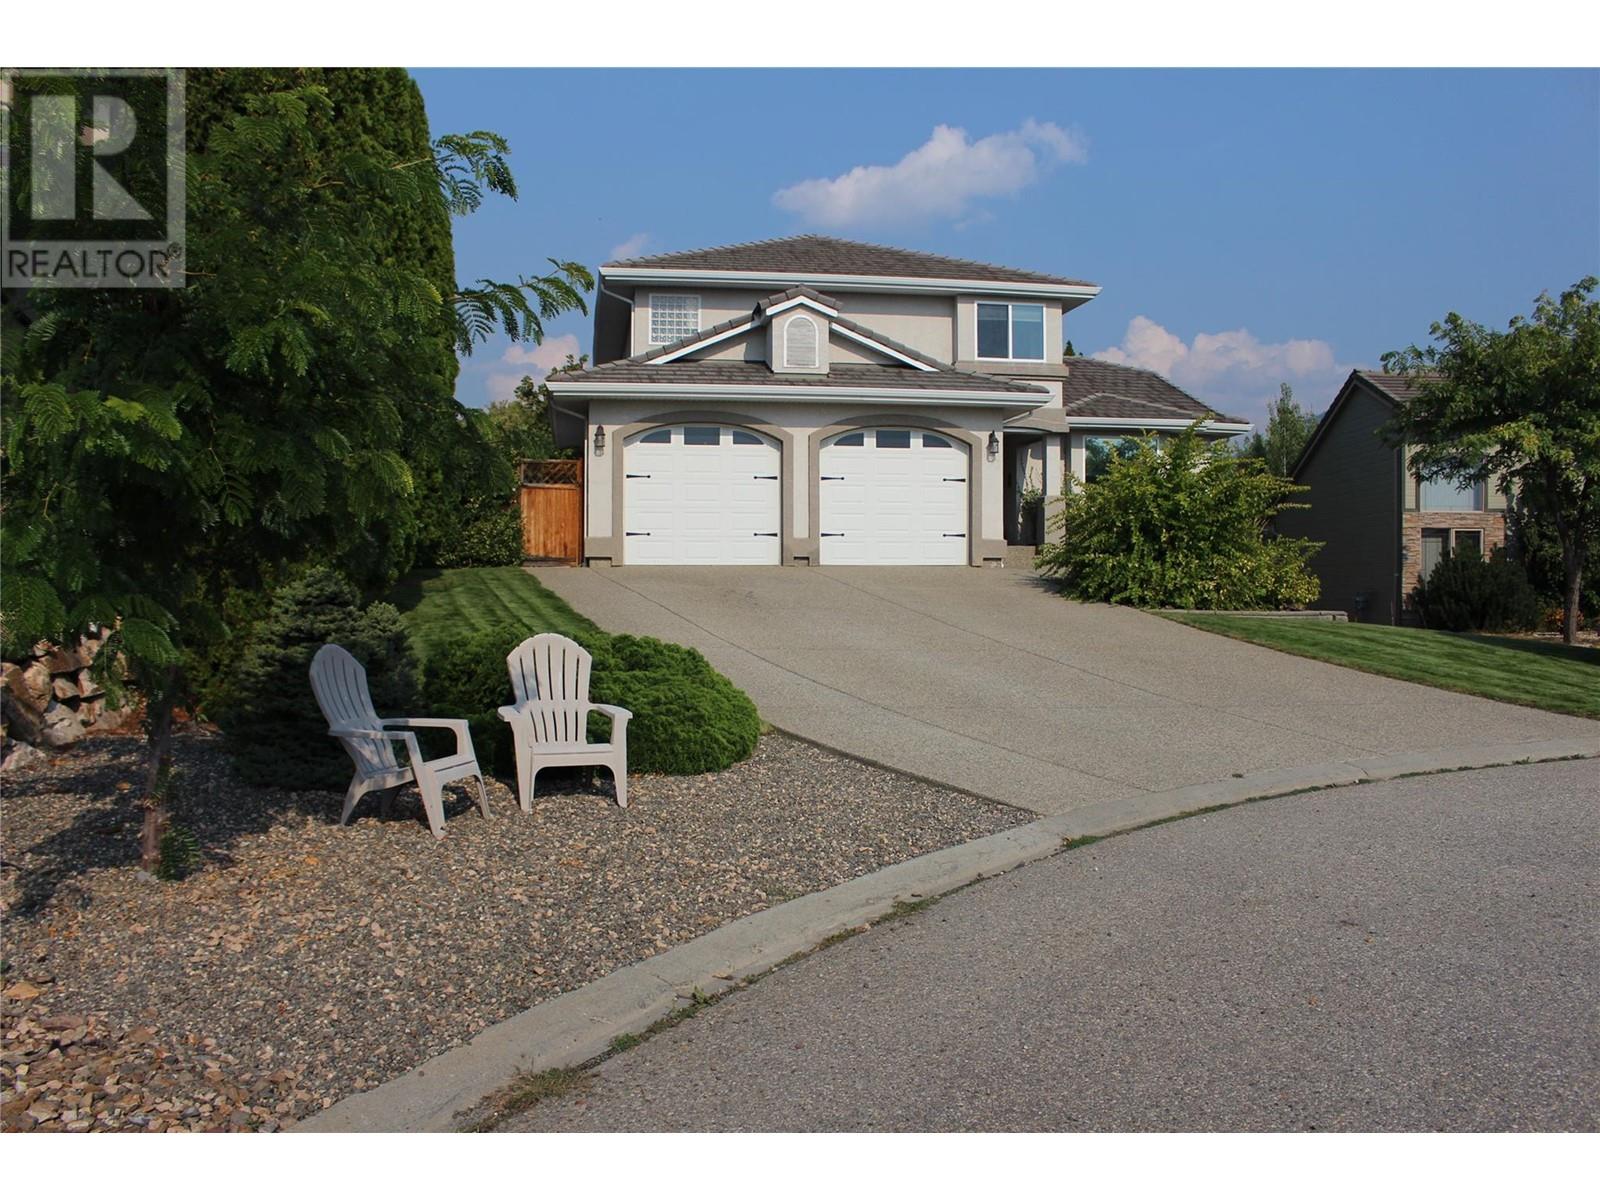 433 Fortress Crescent, Foothills, Vernon 